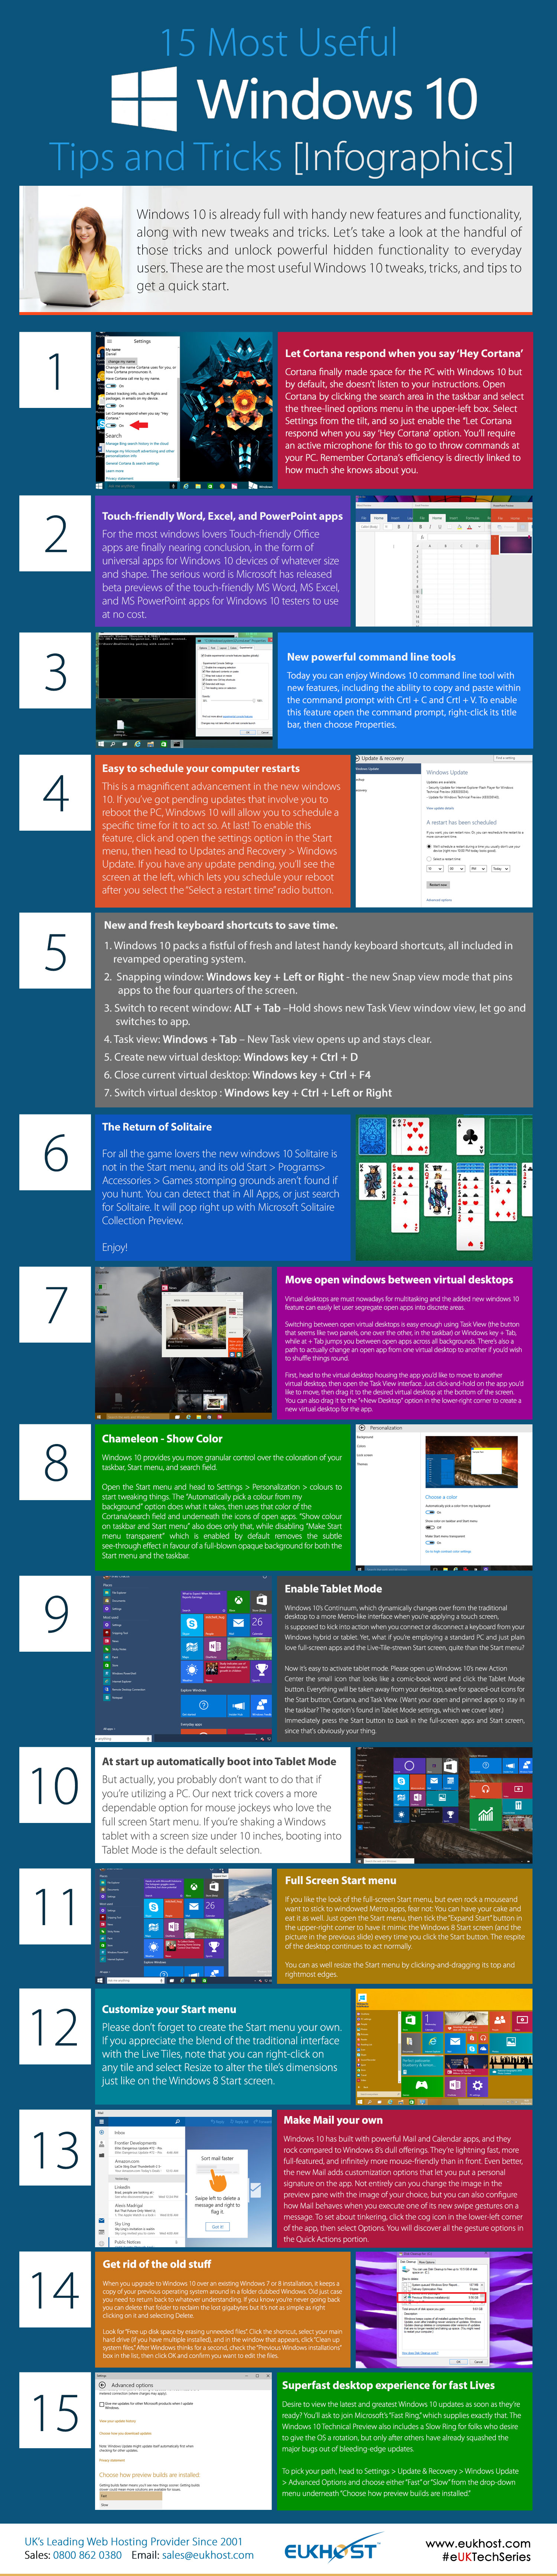 15-Most-Useful-Windows-10-Tips-and-Trick-Infographics